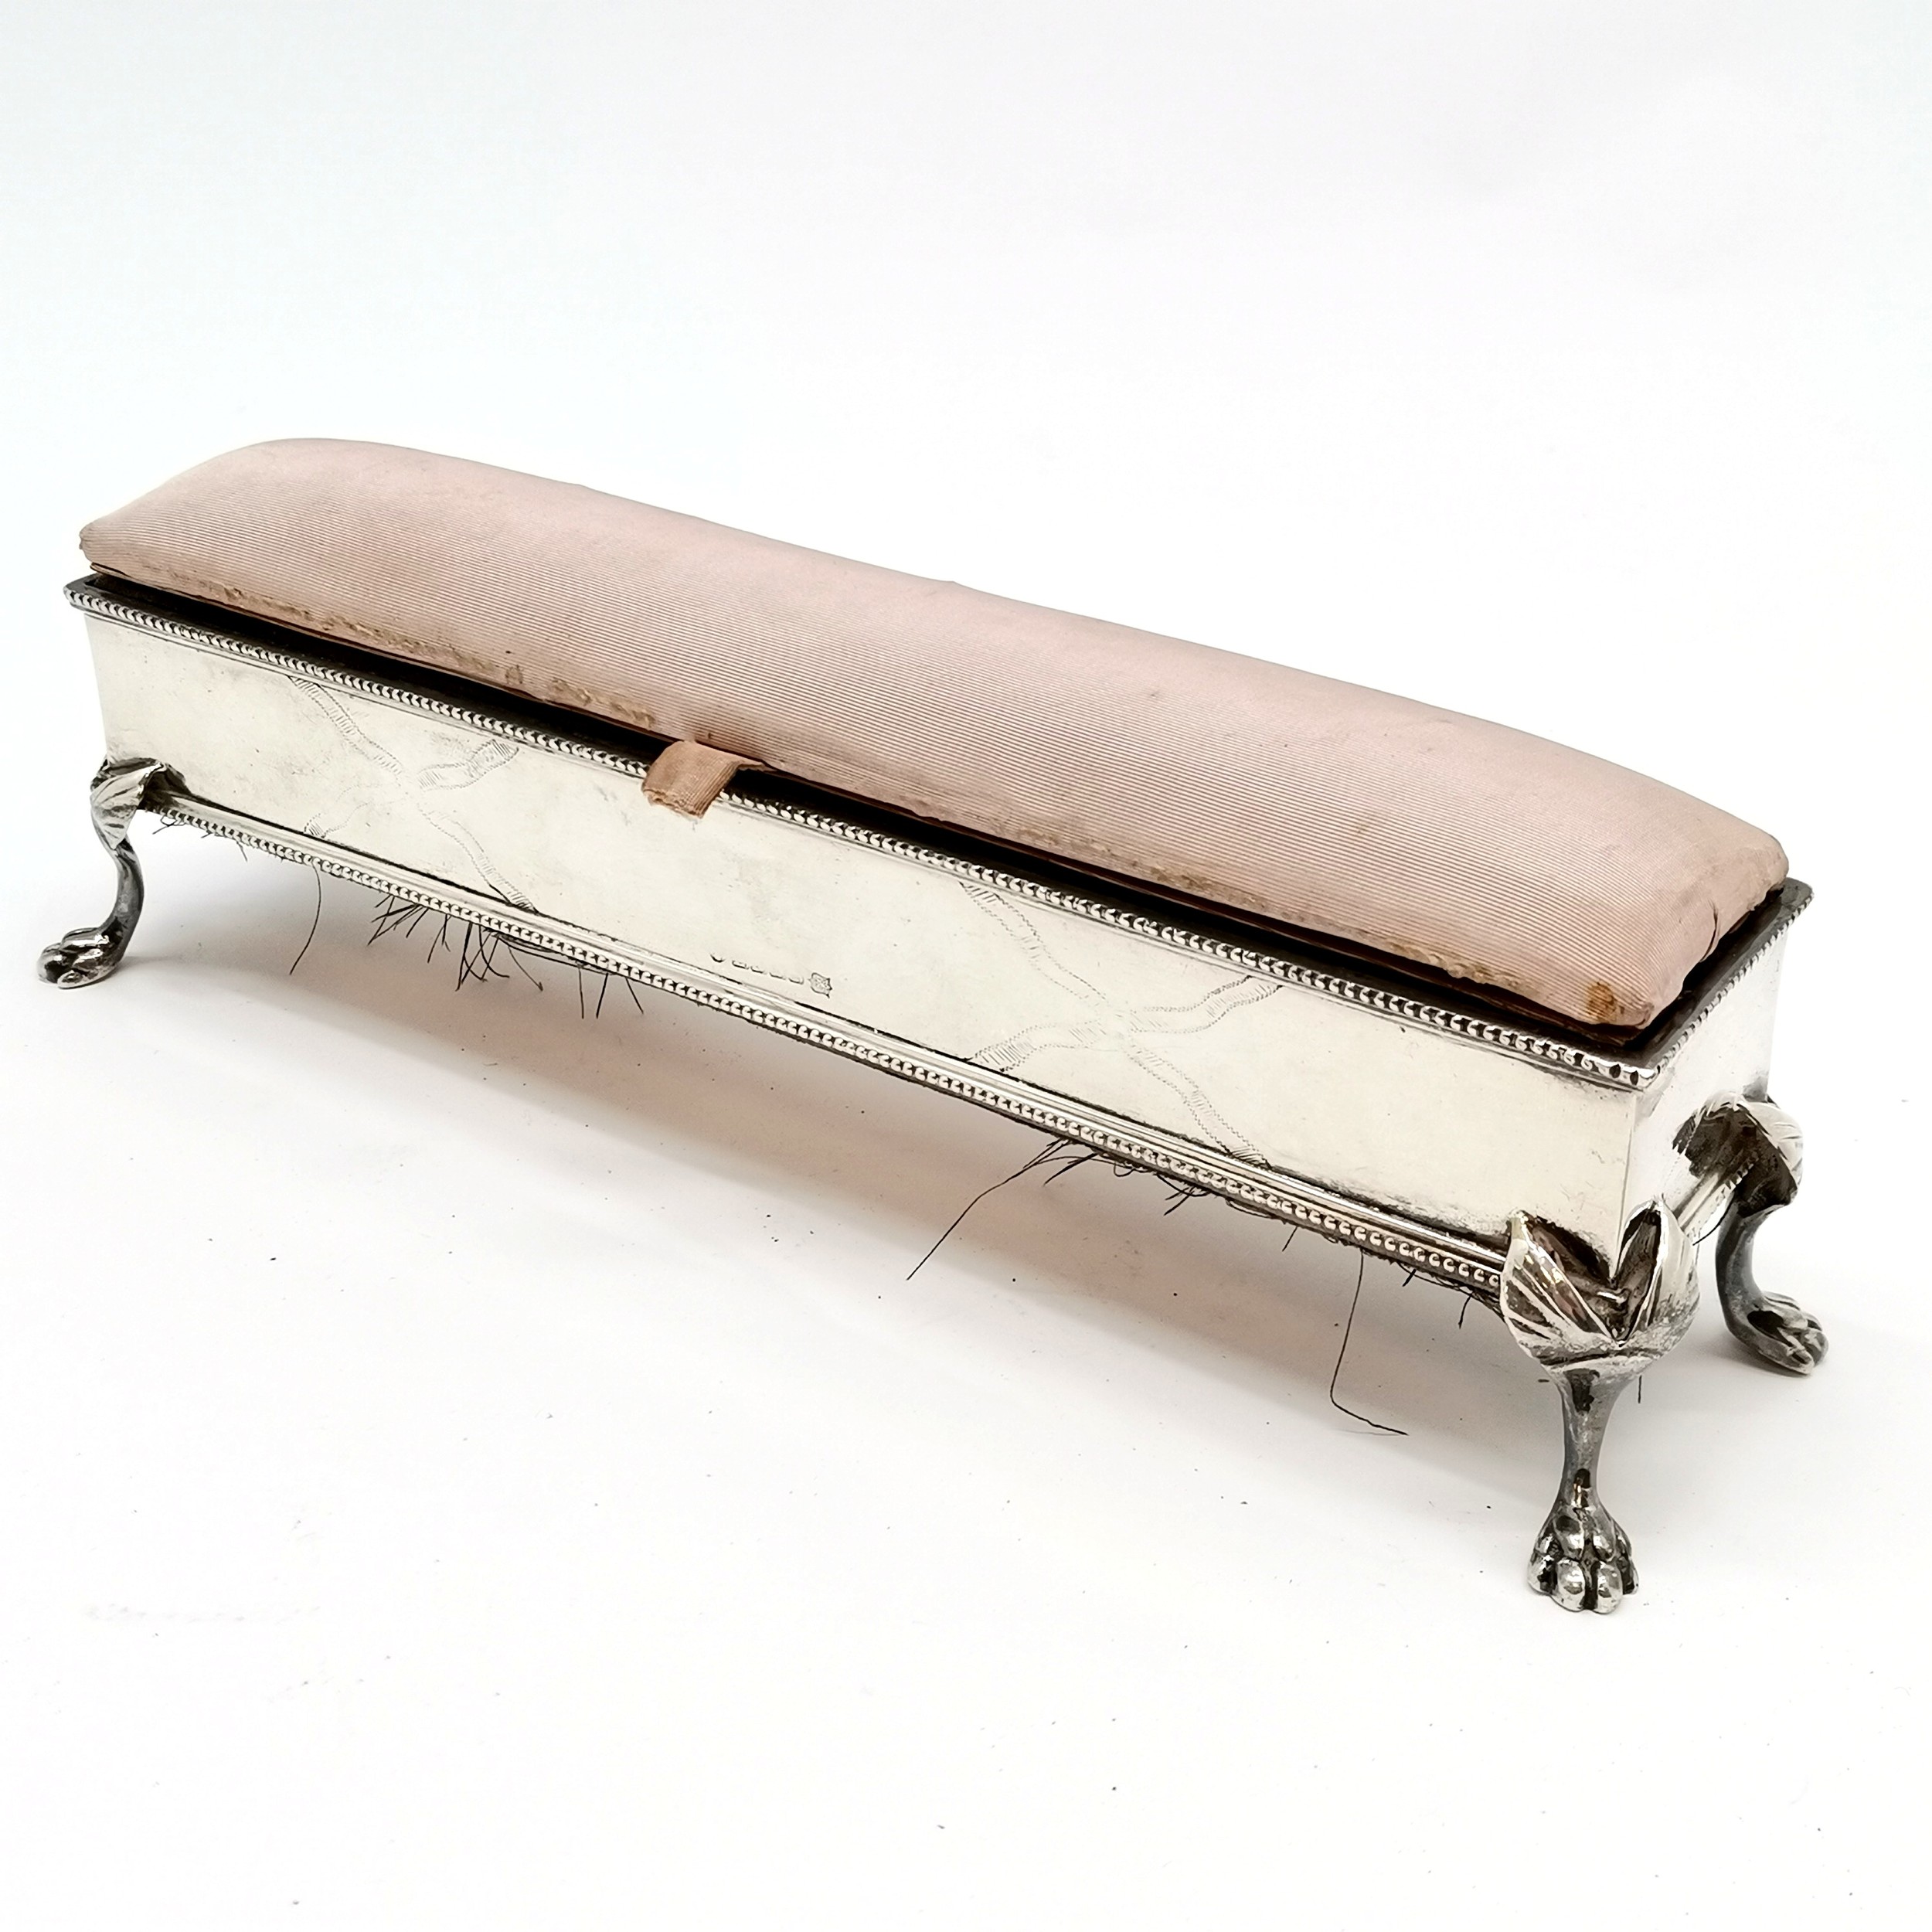 Unusual antique silver plated jewellery box on 4 paw legs with original fabric interior - 26.5cm x - Image 5 of 5